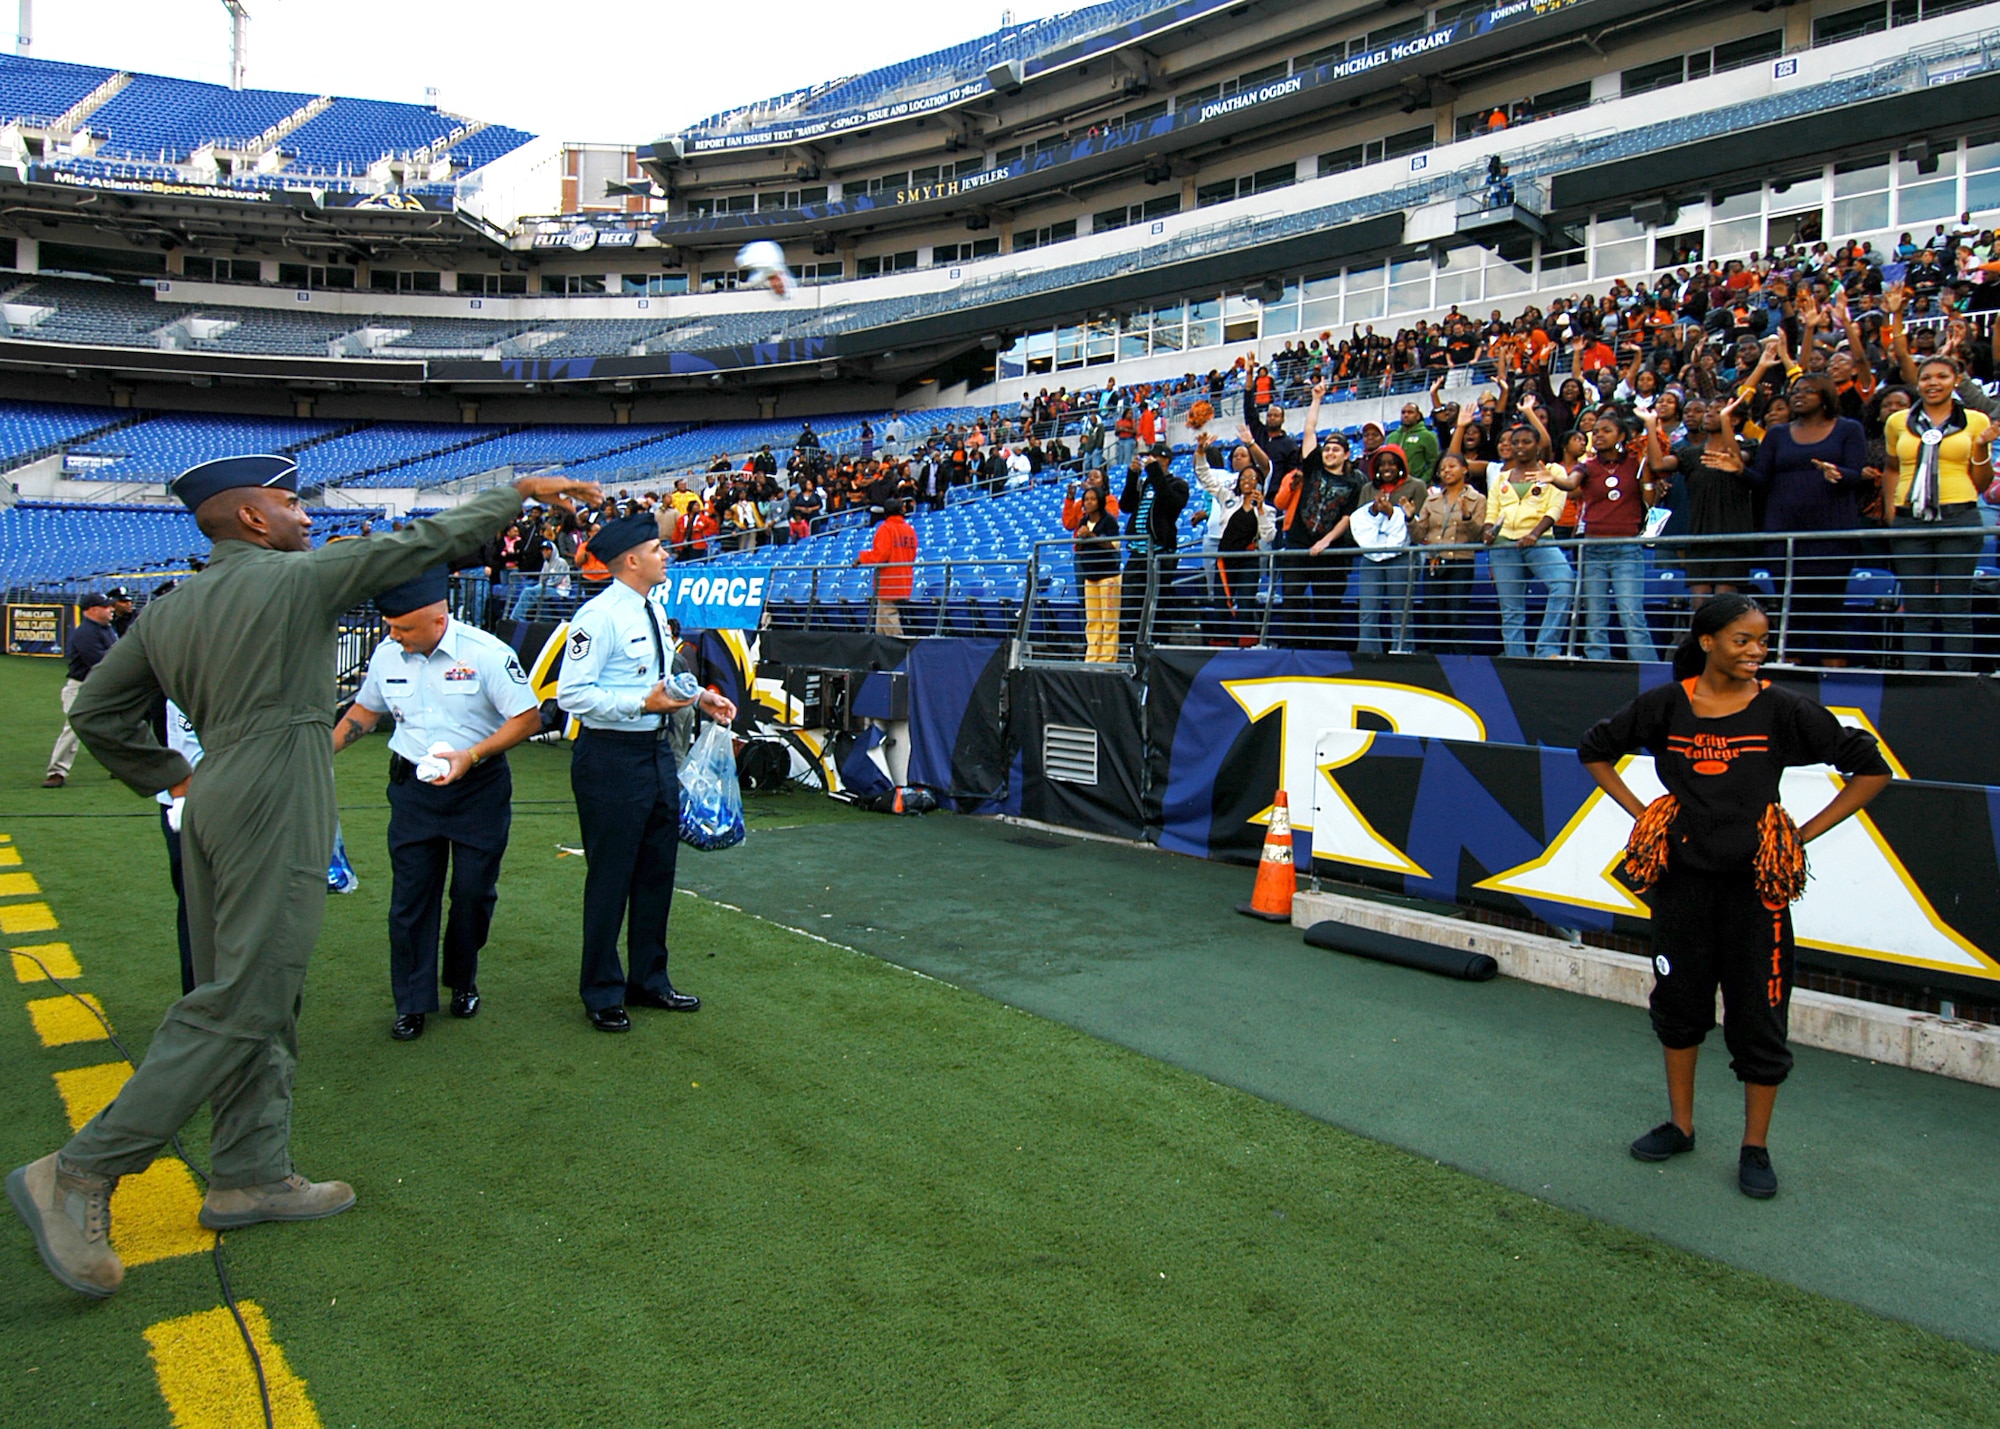 Brig. Gen. Alfred J. Stewart, Tech. Sgt. Stephen Sutton and Master Sgt. Christopher Claar toss free Air Force T-shirts to Baltimore City College High School football fans Nov. 8 at M&T Bank Stadium in Baltimore. A Class of 1977 Baltimore Polytechnic Institute High School alumni, General Stewart shared inspirational words with both teams before the game and he presented a $500 college scholarship to a member of both high schools. General Stewart is the Air Force Recruiting Service commander. Sergeants Sutton and Claar are assigned to the 317th Recruiting Squadron. (U.S. Air Force photo/Tech. Sgt. Jennifer Lindsey) 
